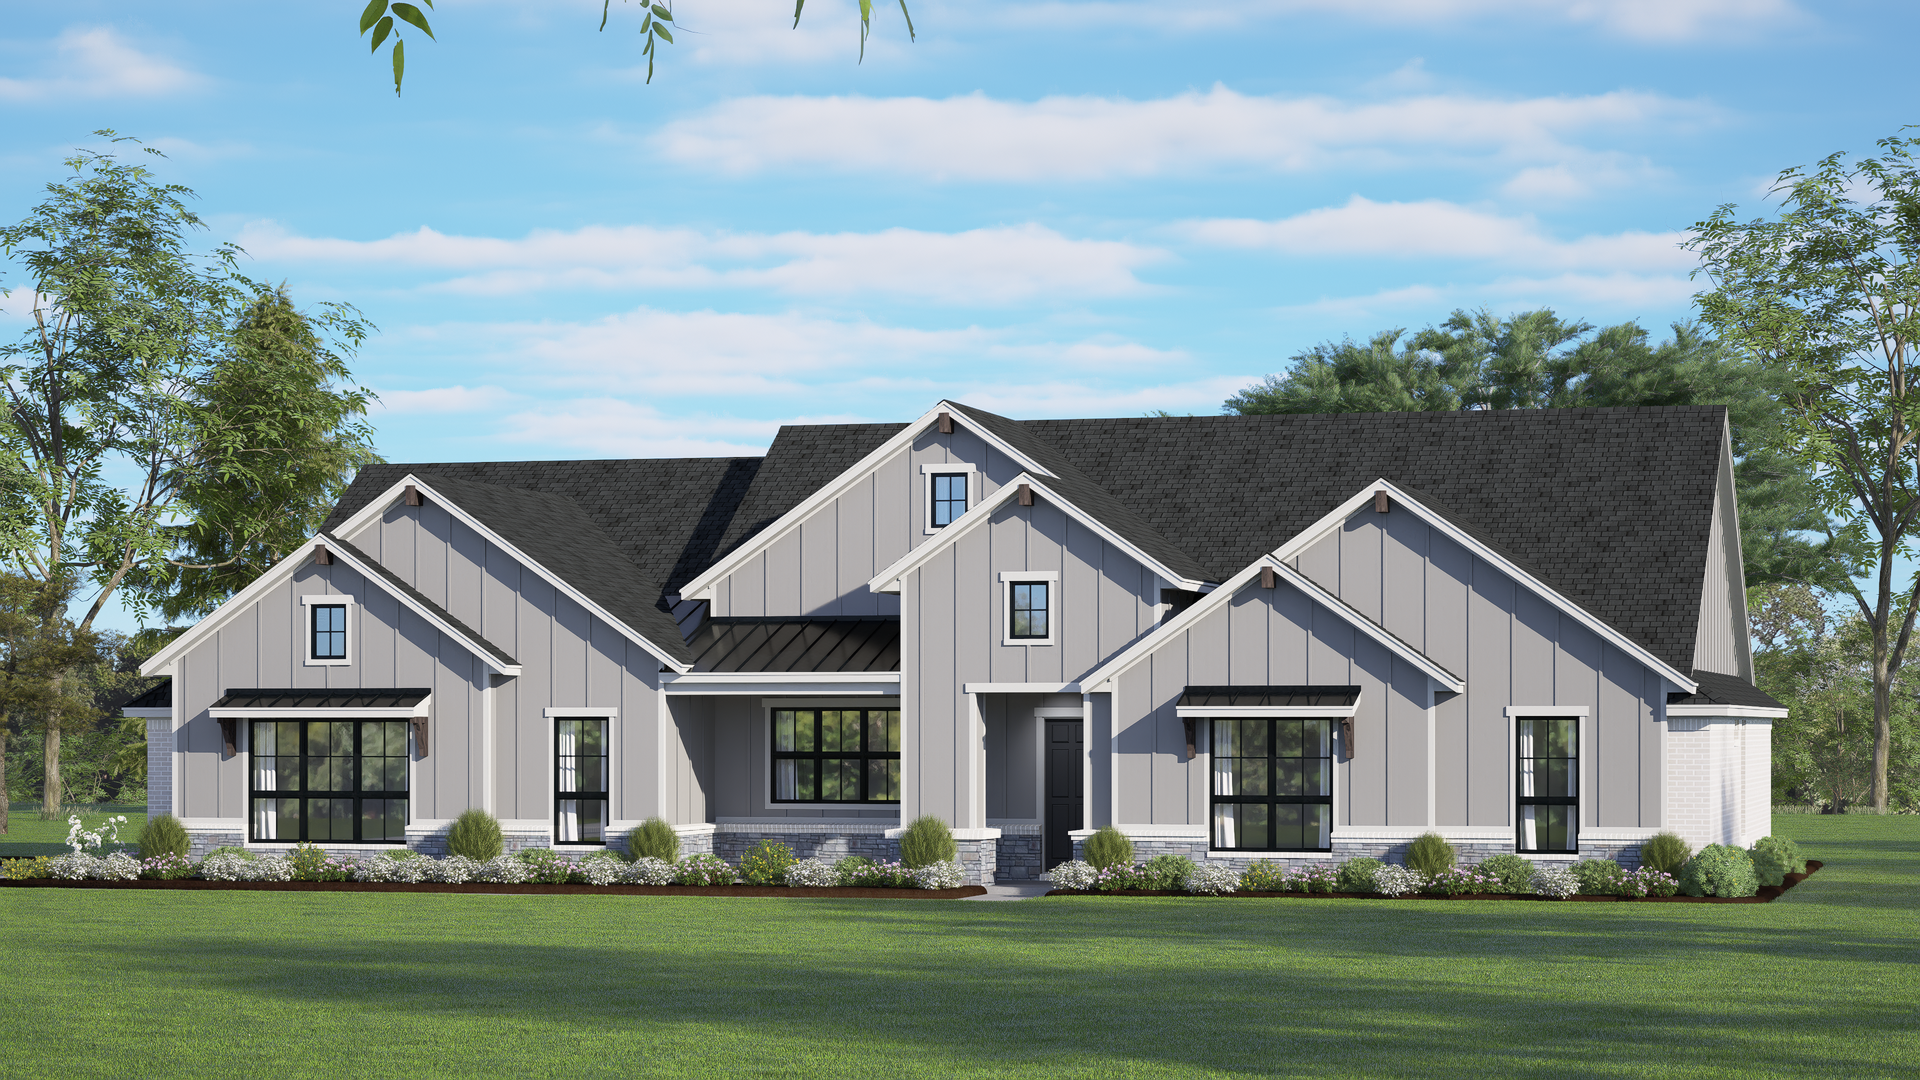 2797 D. Concept 2797 Home with 4 Bedrooms